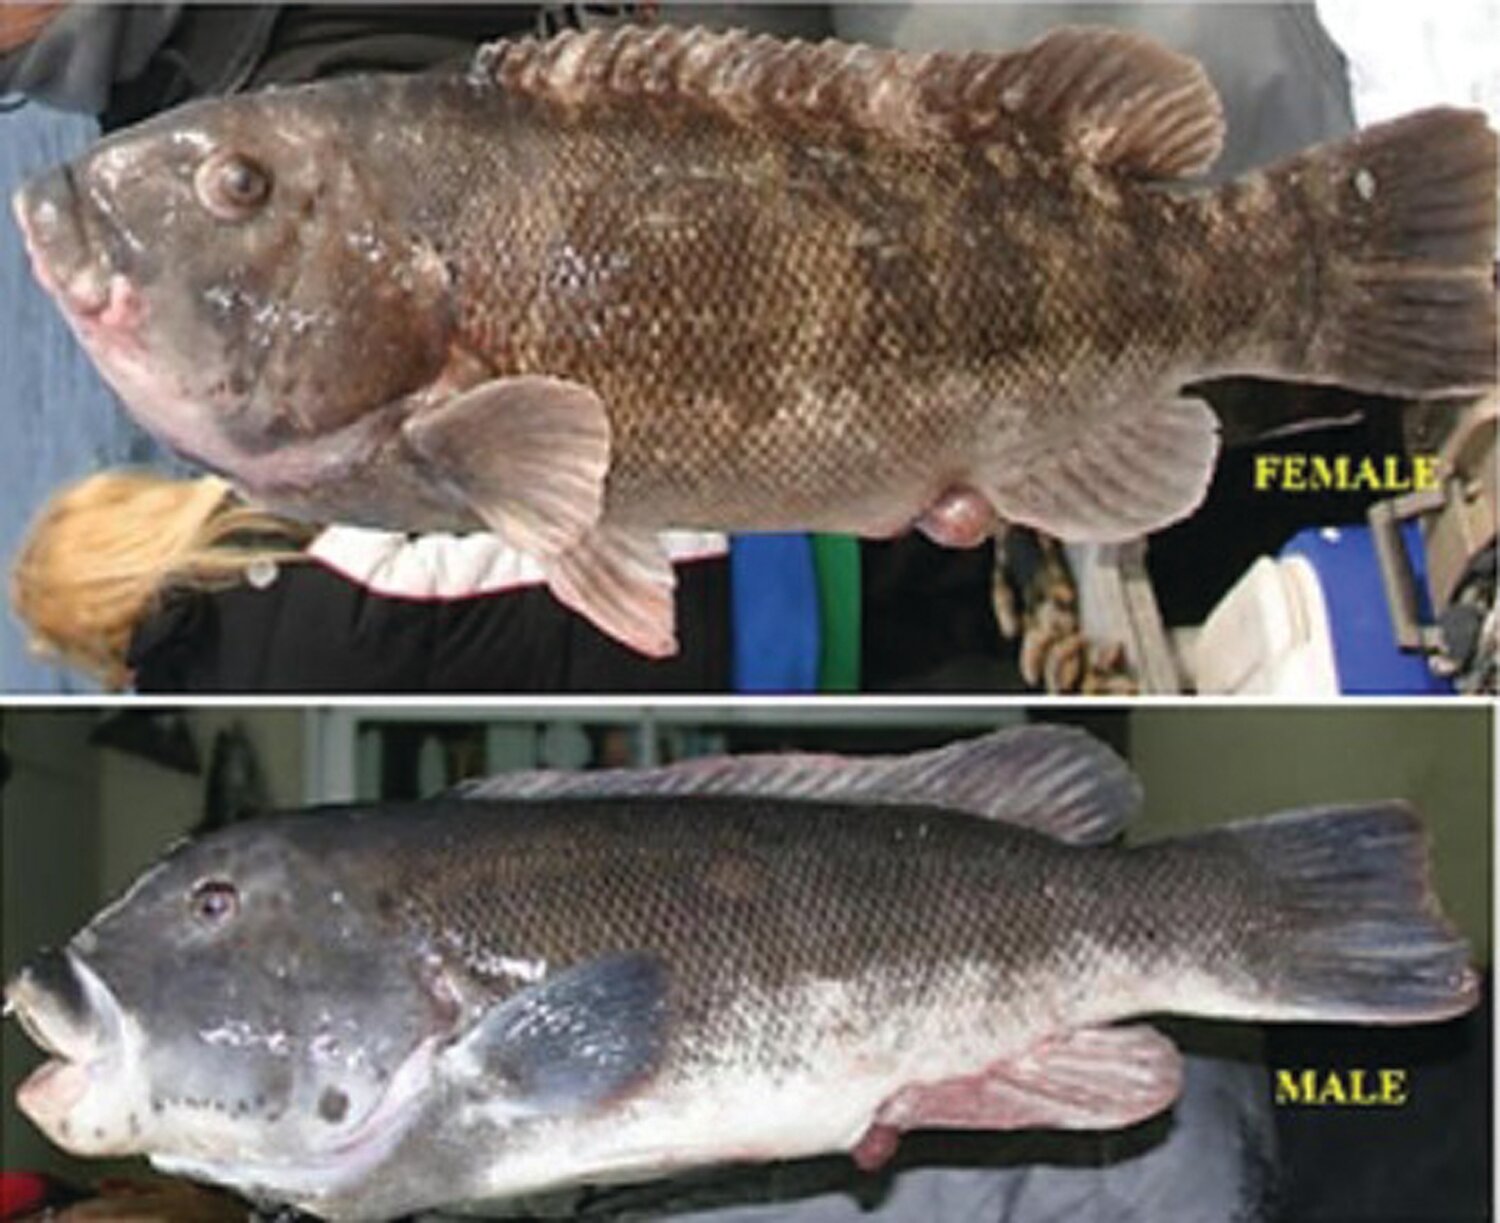 TAUTOGS: “Return egg bearing female tautog to the water,” said Declan O’Donnell of Breachway Bait & Tackle. Males have a pronounced white chin/lip with a more consistent skin tone and coloration.